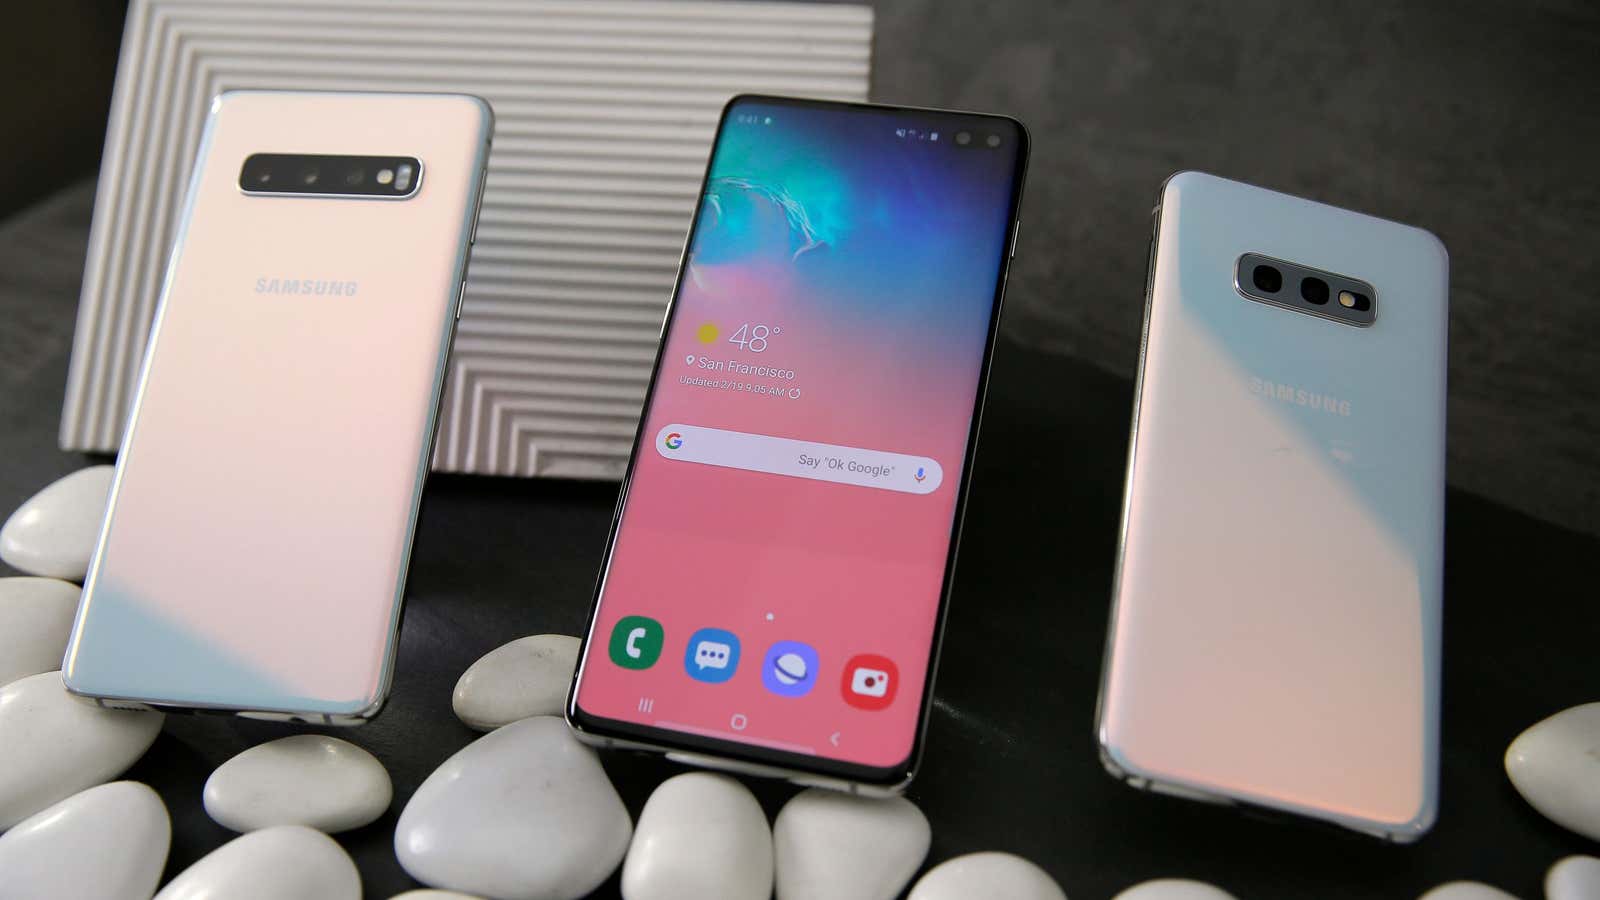 Samsung’s new Galaxy S10, S10+, and S10e phones.